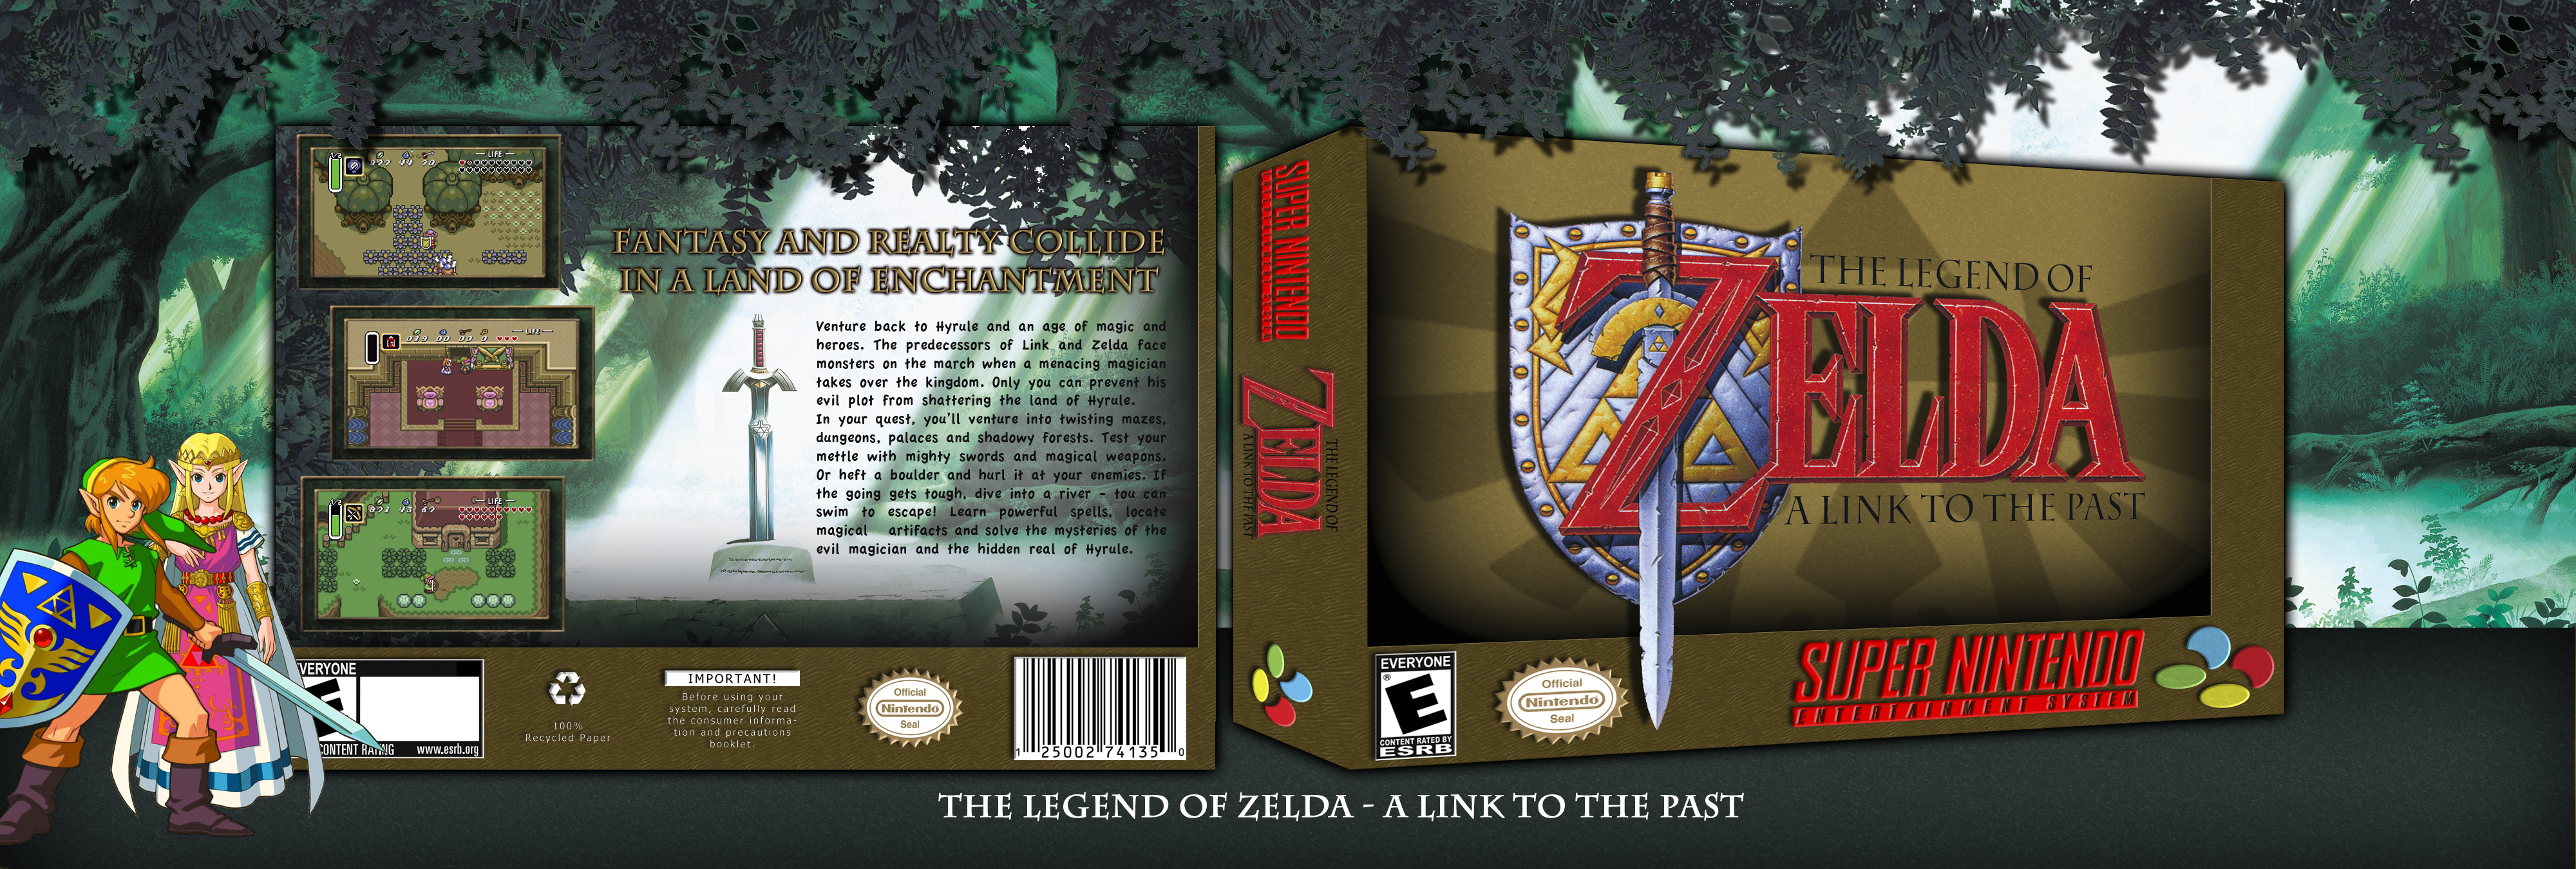 The Legend Of Zelda A Link To The Past Snes Box Art Cover By Didac Fl